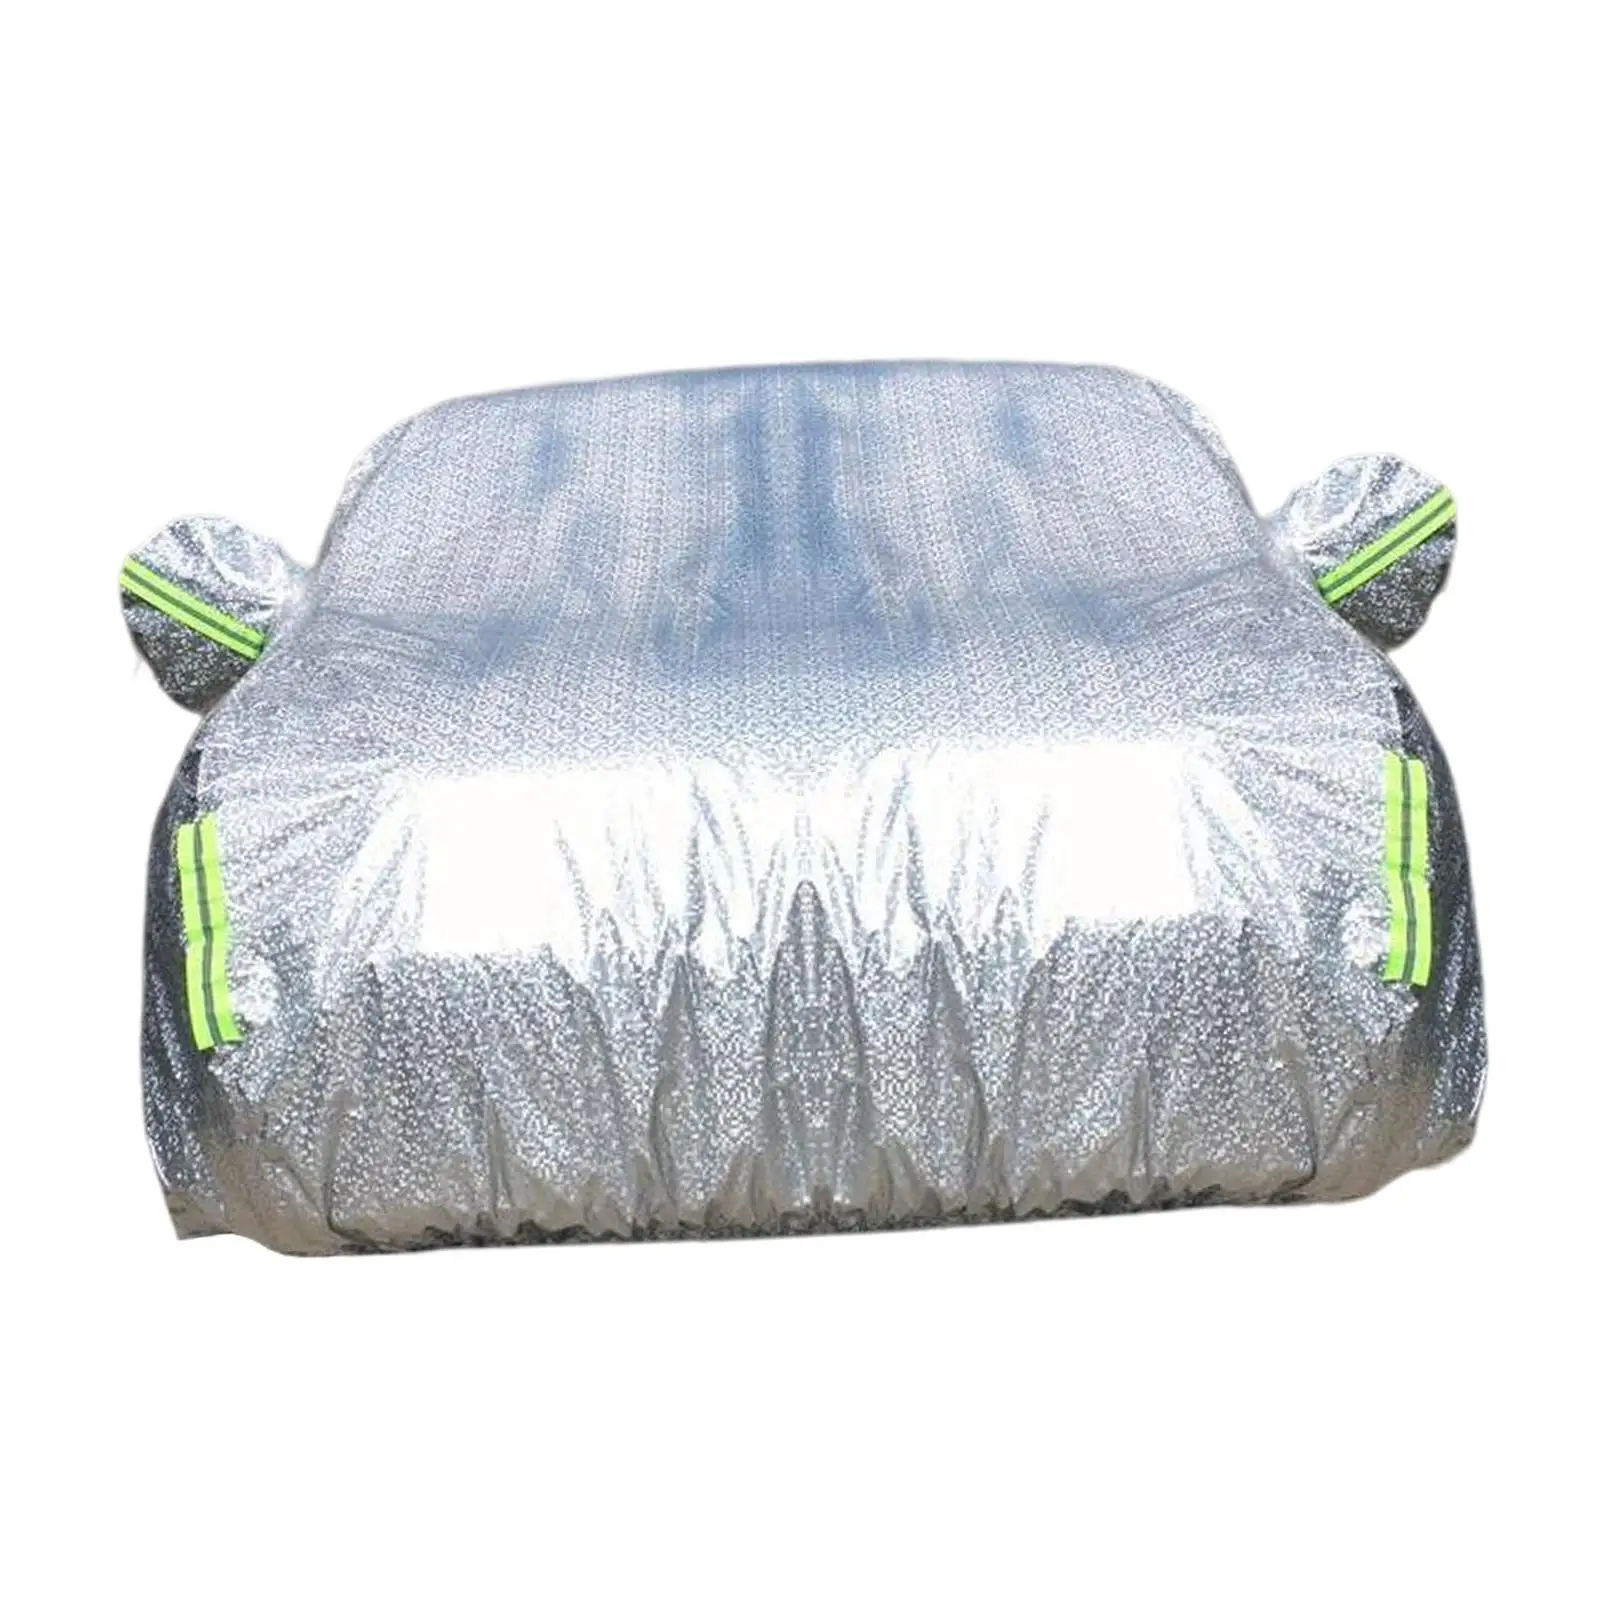 Automobile Full Exterior Covers for Atto 3 Yuan Plus Rain Sun Protection with Door Zipper Accessories Multi Layer Material